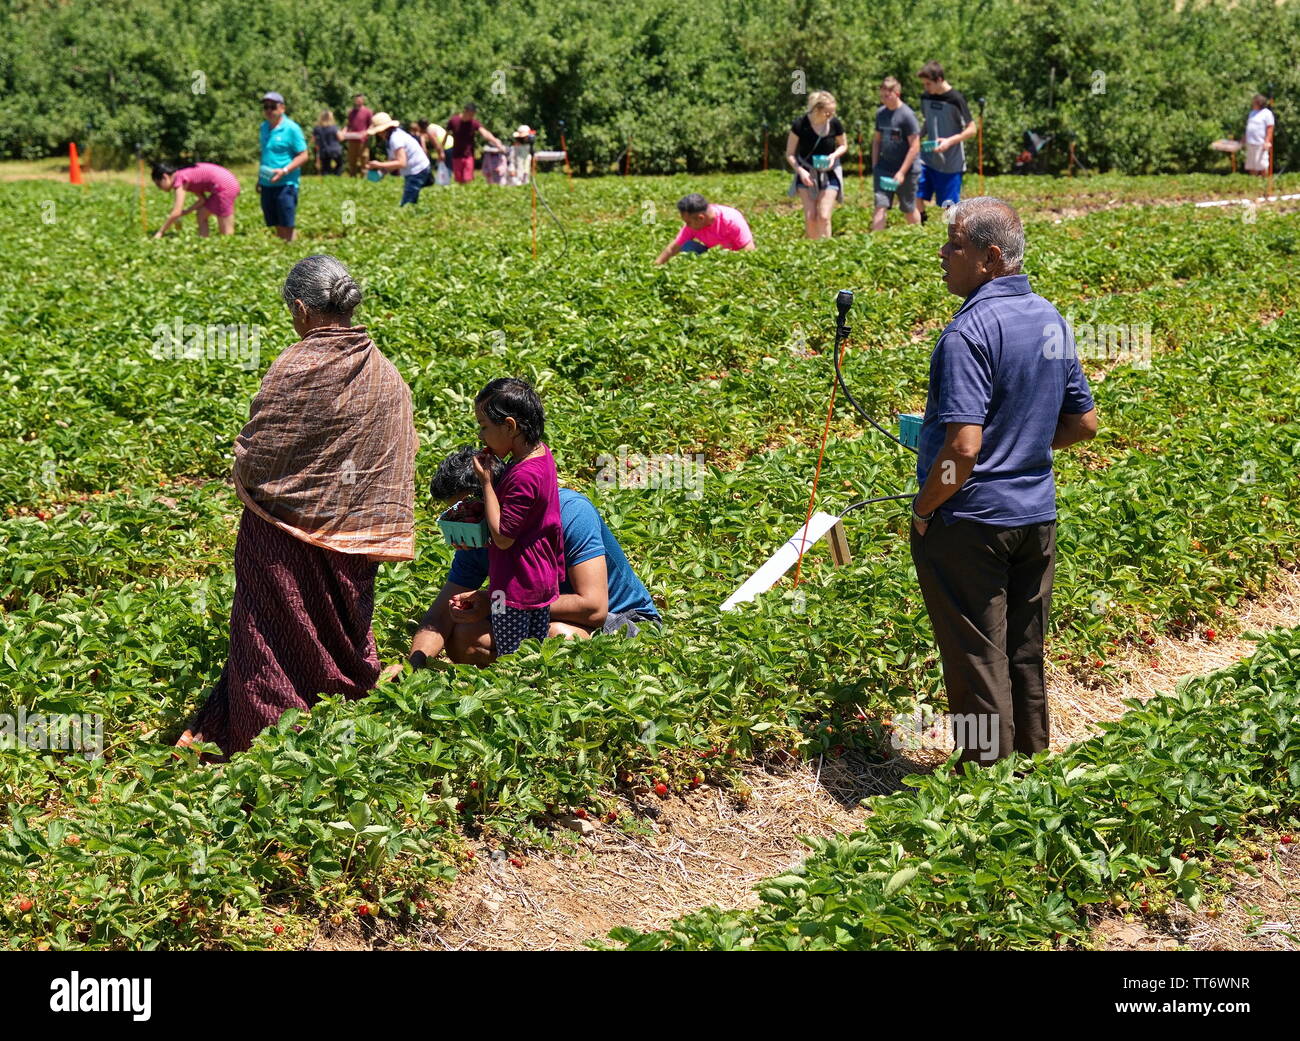 Middlefield, CT USA. Jun 2019. Indian American family enjoying the first days of a New England fruit picking season for delicious strawberries. Stock Photo